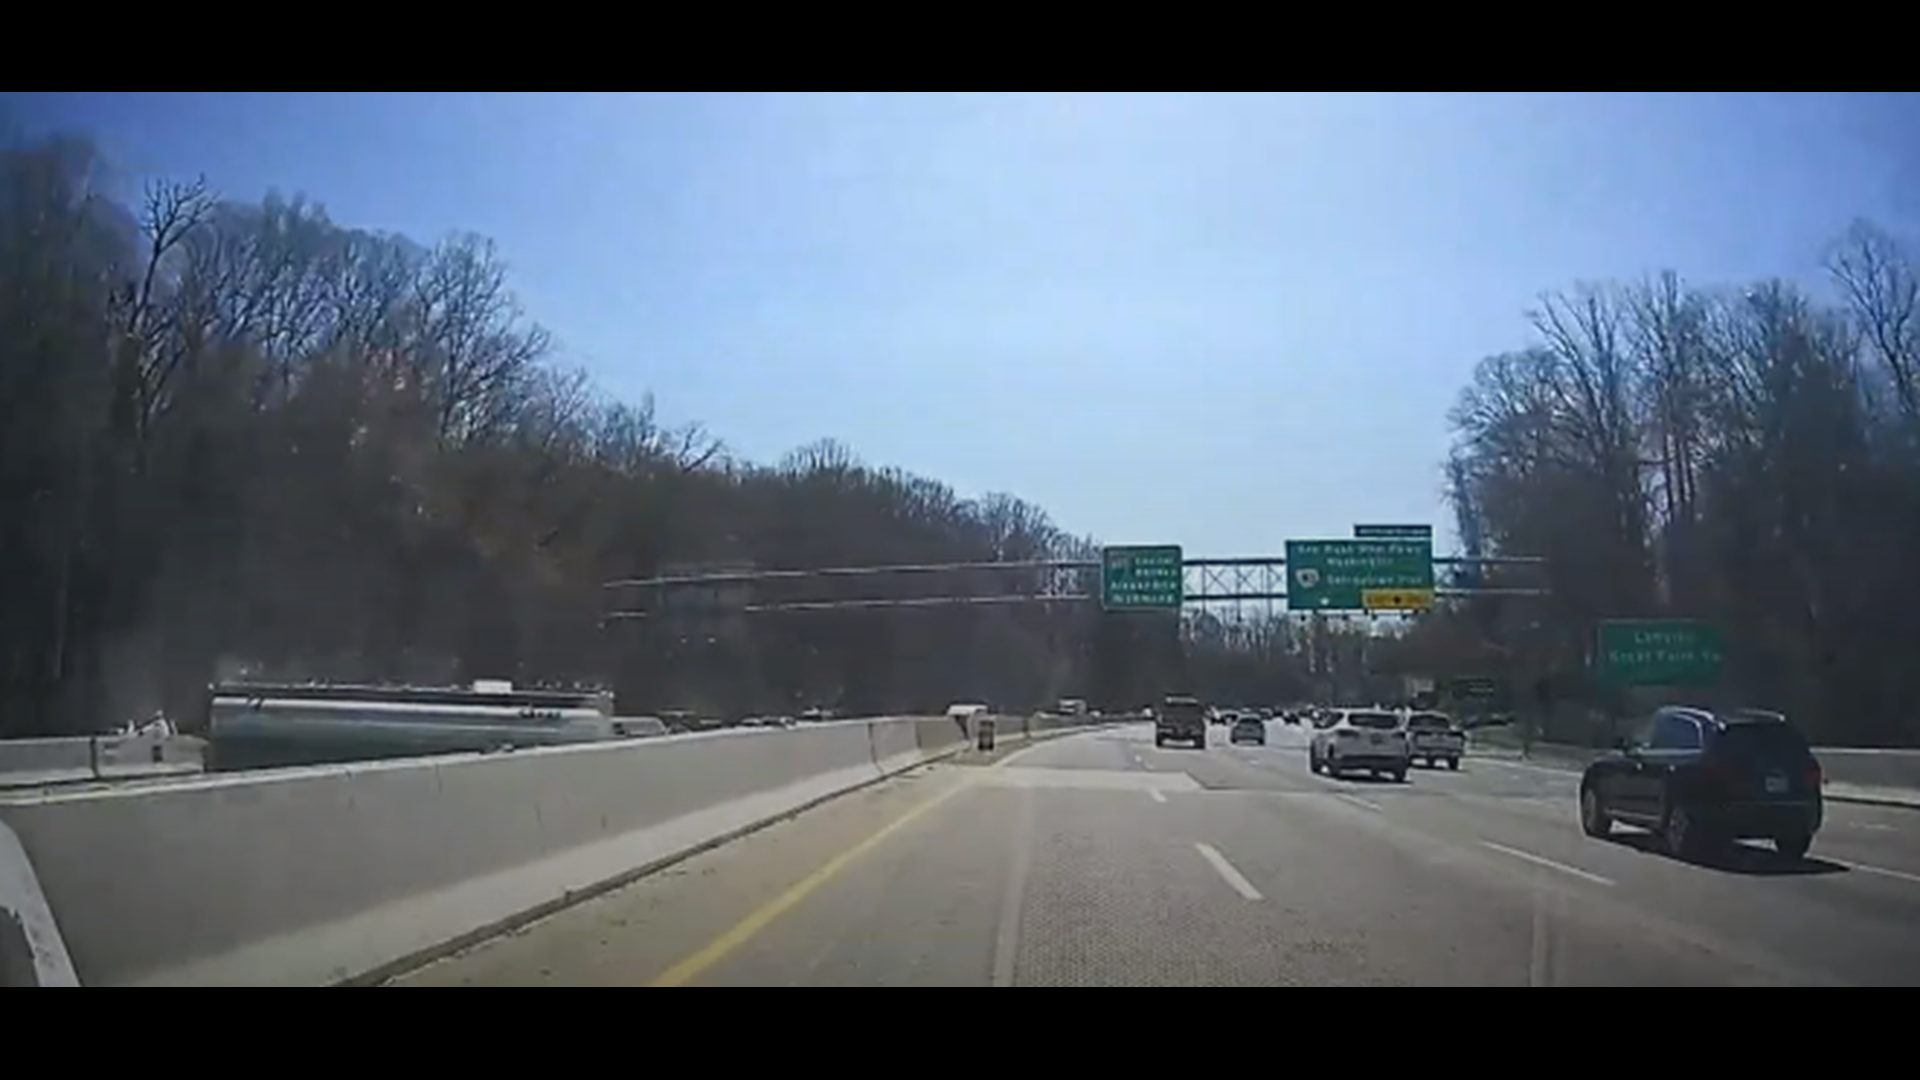 All northbound lanes of the Capital Beltway shutdown after tanker truck overturns. Video courtesy of Harold Smith.